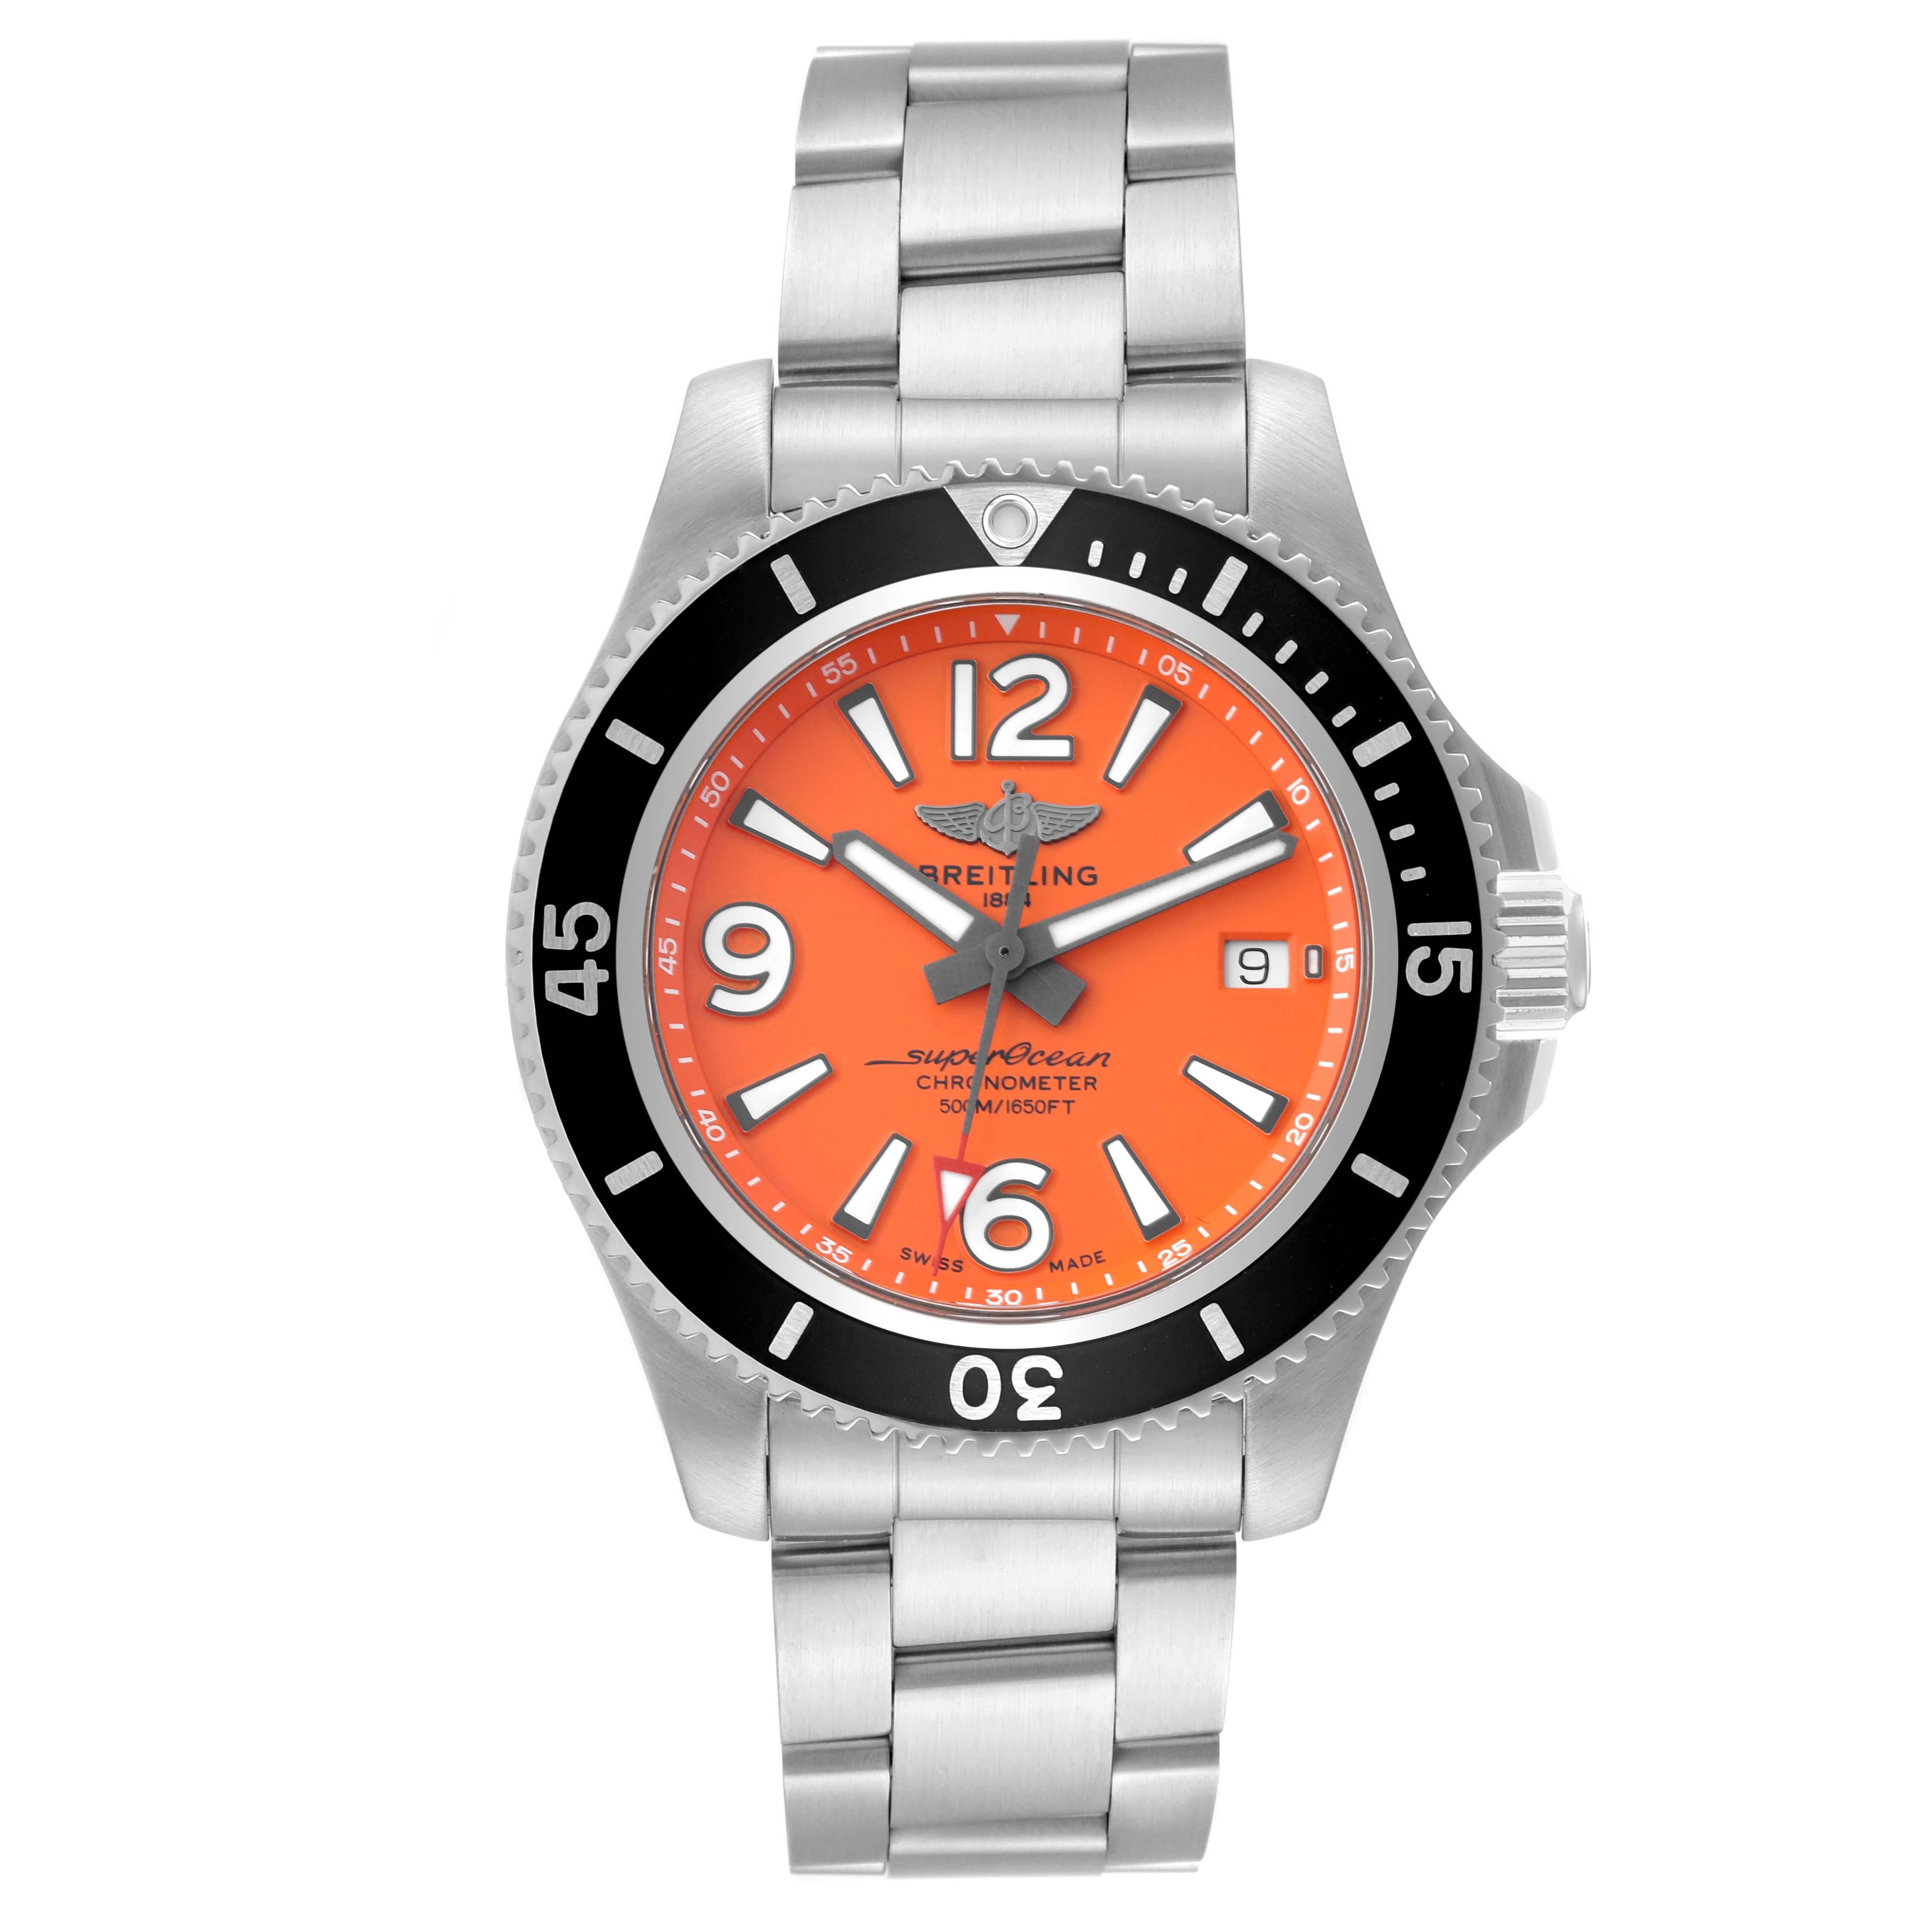 Breitling Superocean 42 Orange Dial Steel Mens Watch A17366 Box Card. Automatic self-winding movement. Stainless steel case 42.0 mm in diameter. Stainless steel screwed-down crown. Black stainless steel unidirectional revolving bezel. 0-60